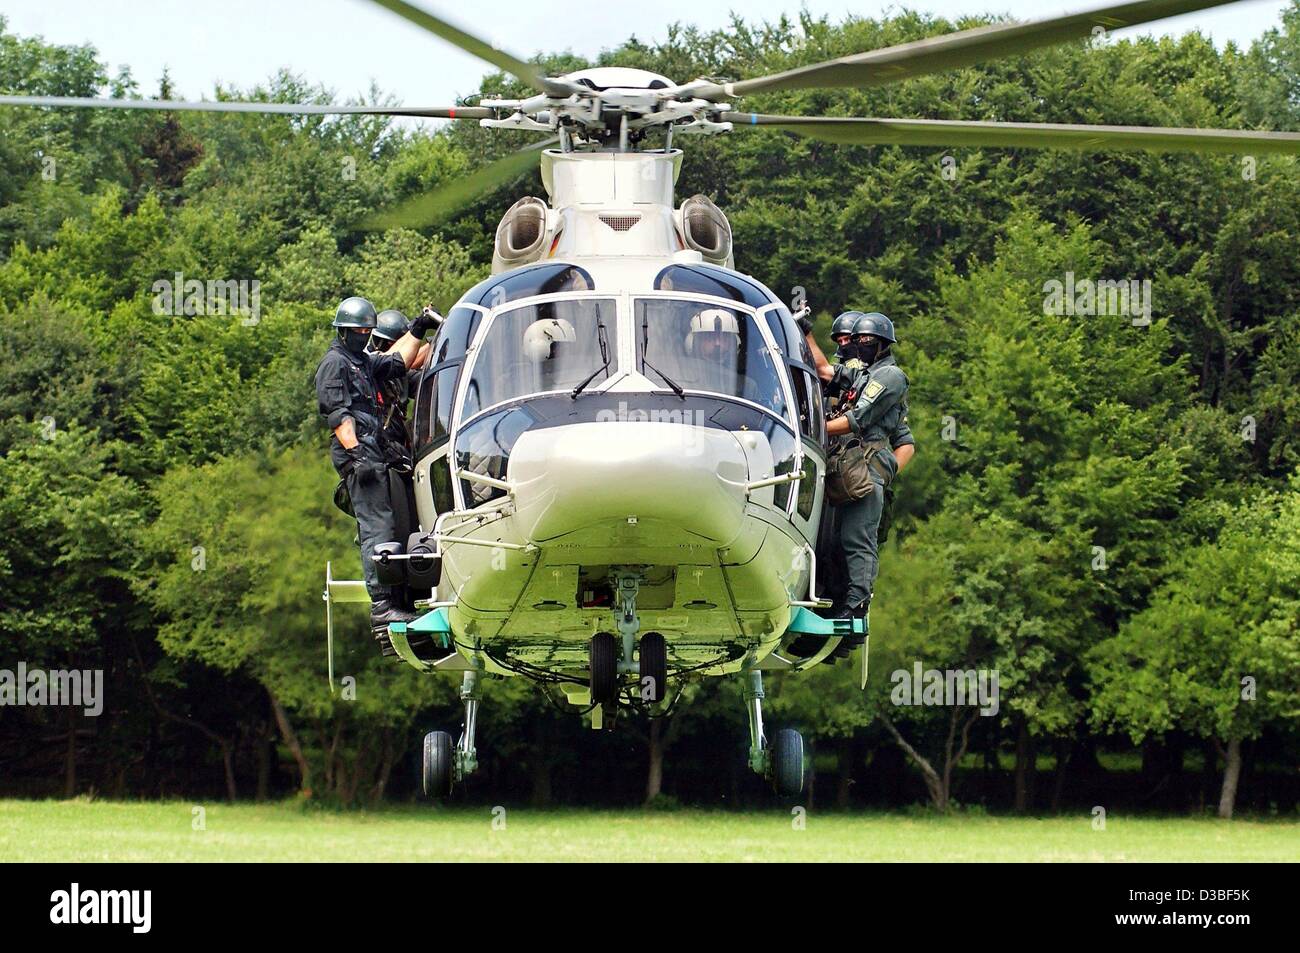 (dpa) - A Eurocopter of the type EC-155 manned with police special forces (SEK) takes off from a clearing during a police exercise near Deggingen, 25 June 2003. Pilots and training units of the police and of the SEK (Sondereinsatzkommando) took part in these execises. Stock Photo